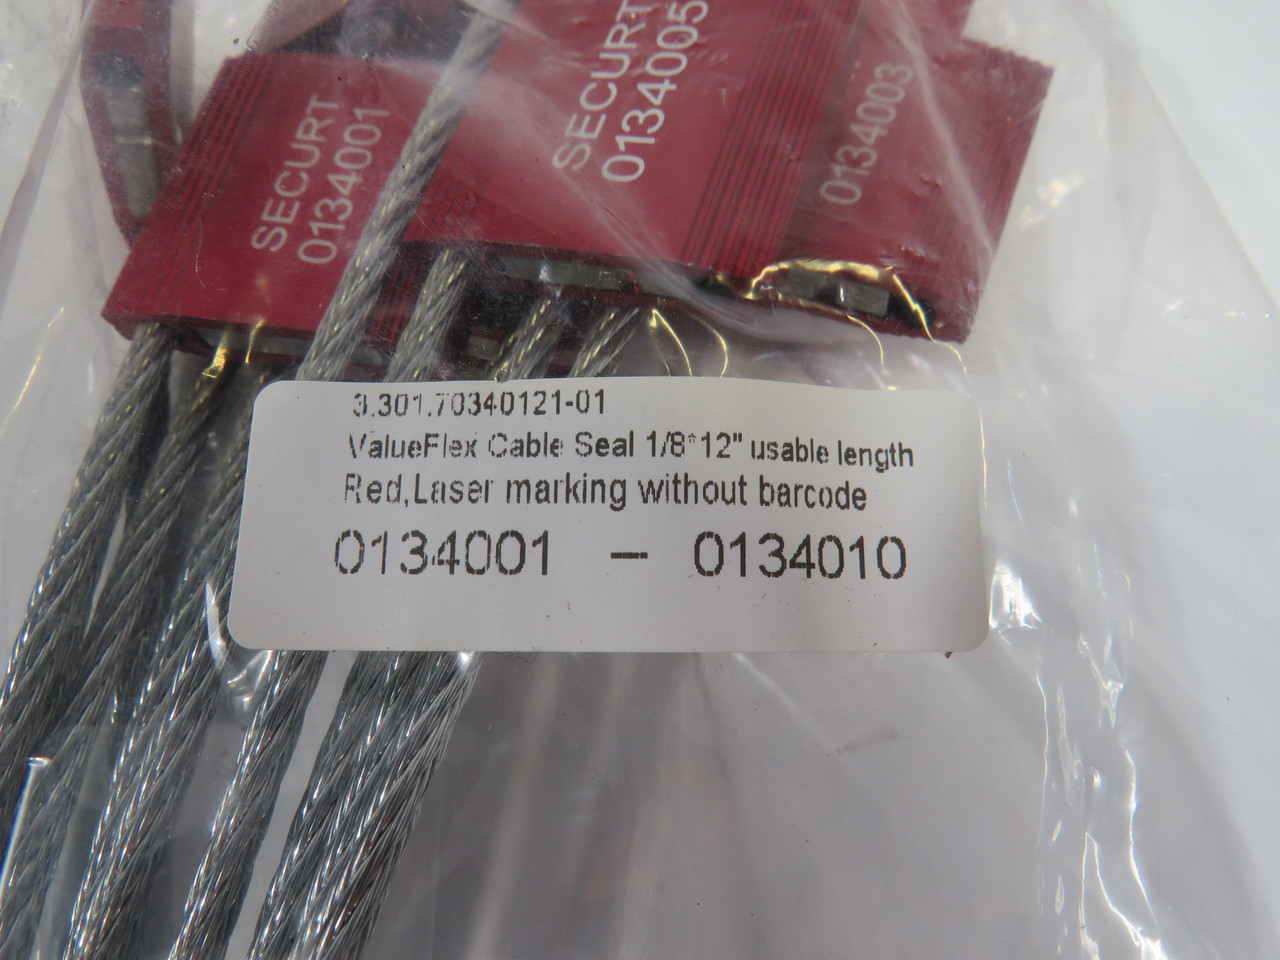 ValueFlex 3.301.70340121-01 Red Cable Seal 1/8"X12" 170-Pk ! NEW !